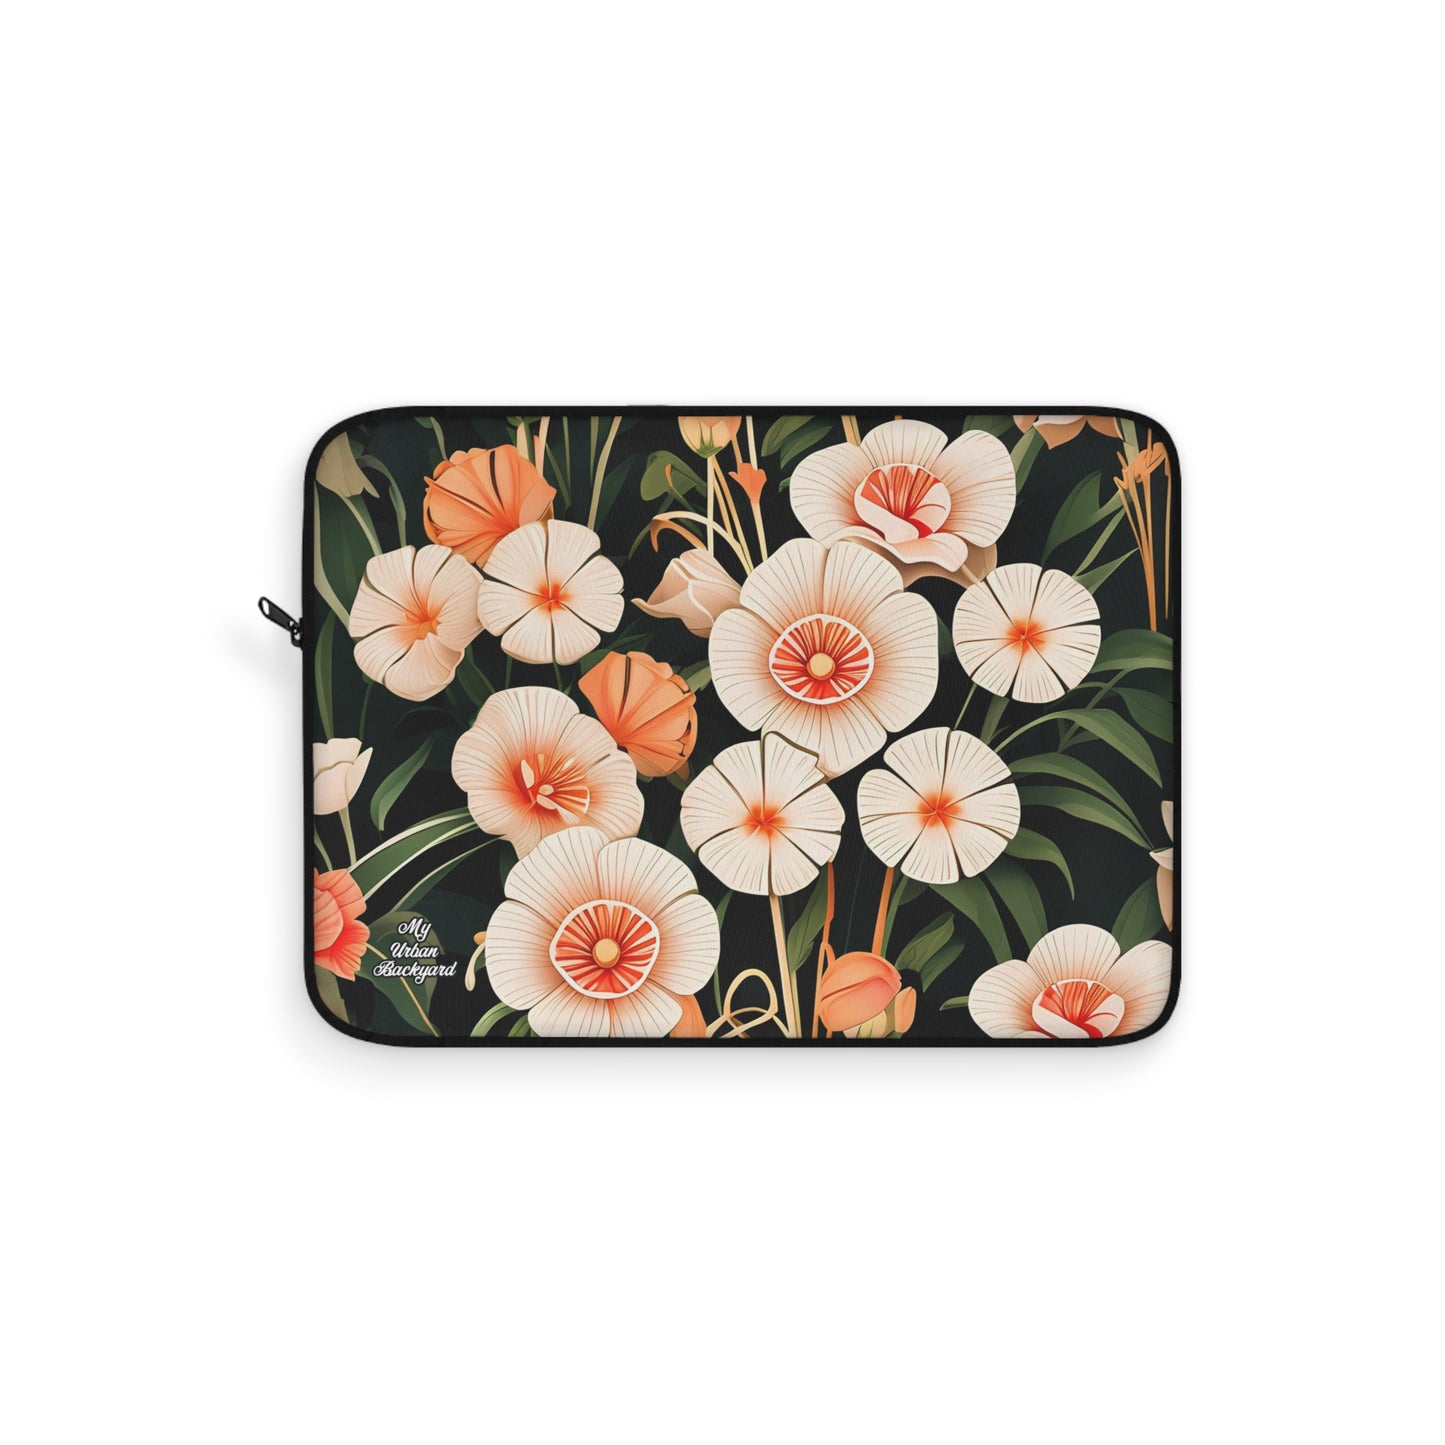 Art Deco Flowers, Laptop Carrying Case, Top Loading Sleeve for School or Work